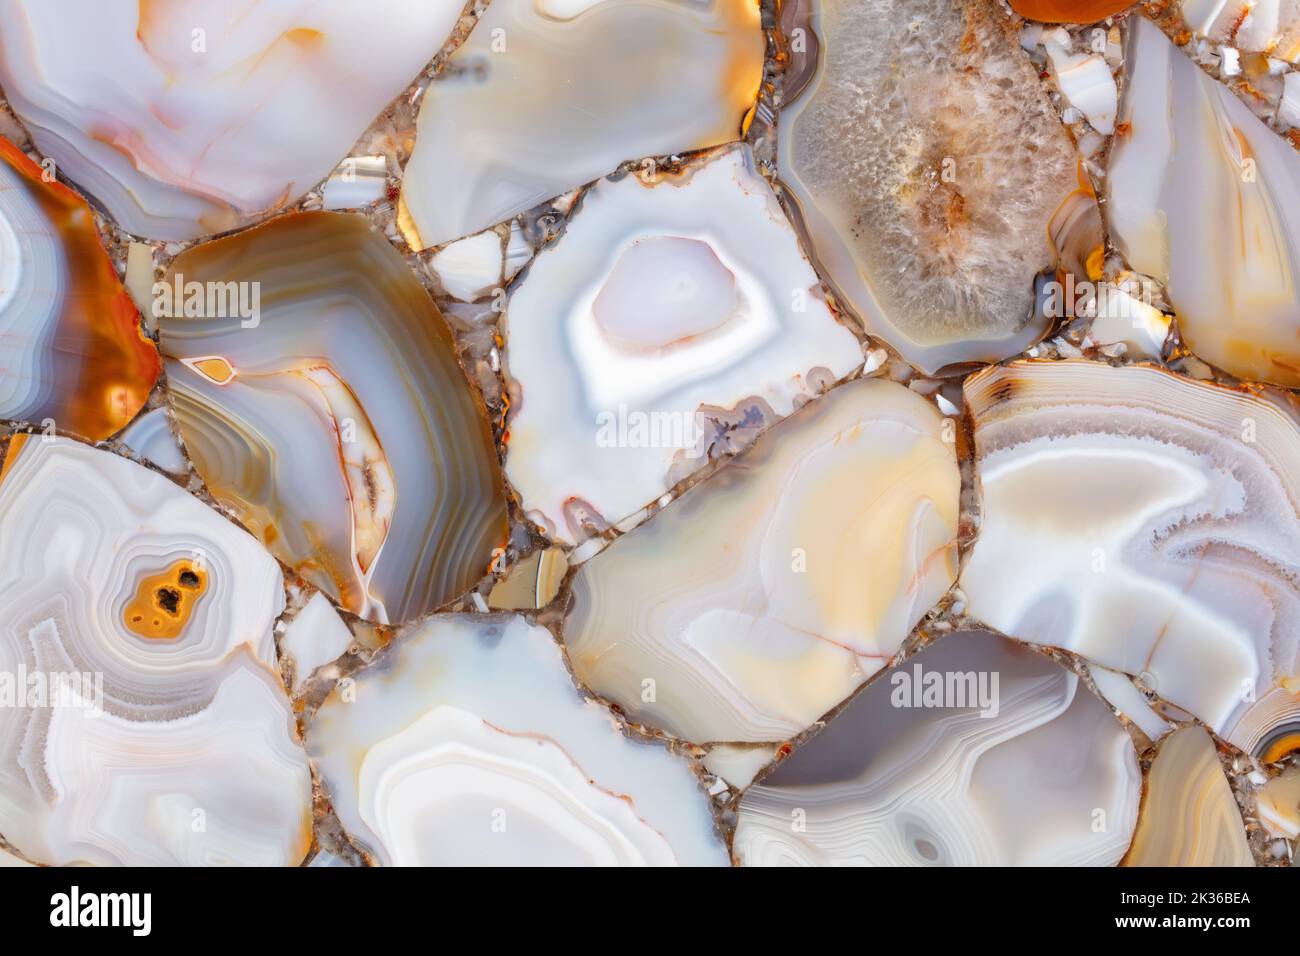 Natural agates, semi precious stones in light color as part of unique personal interior design or other art work. Stock Photo